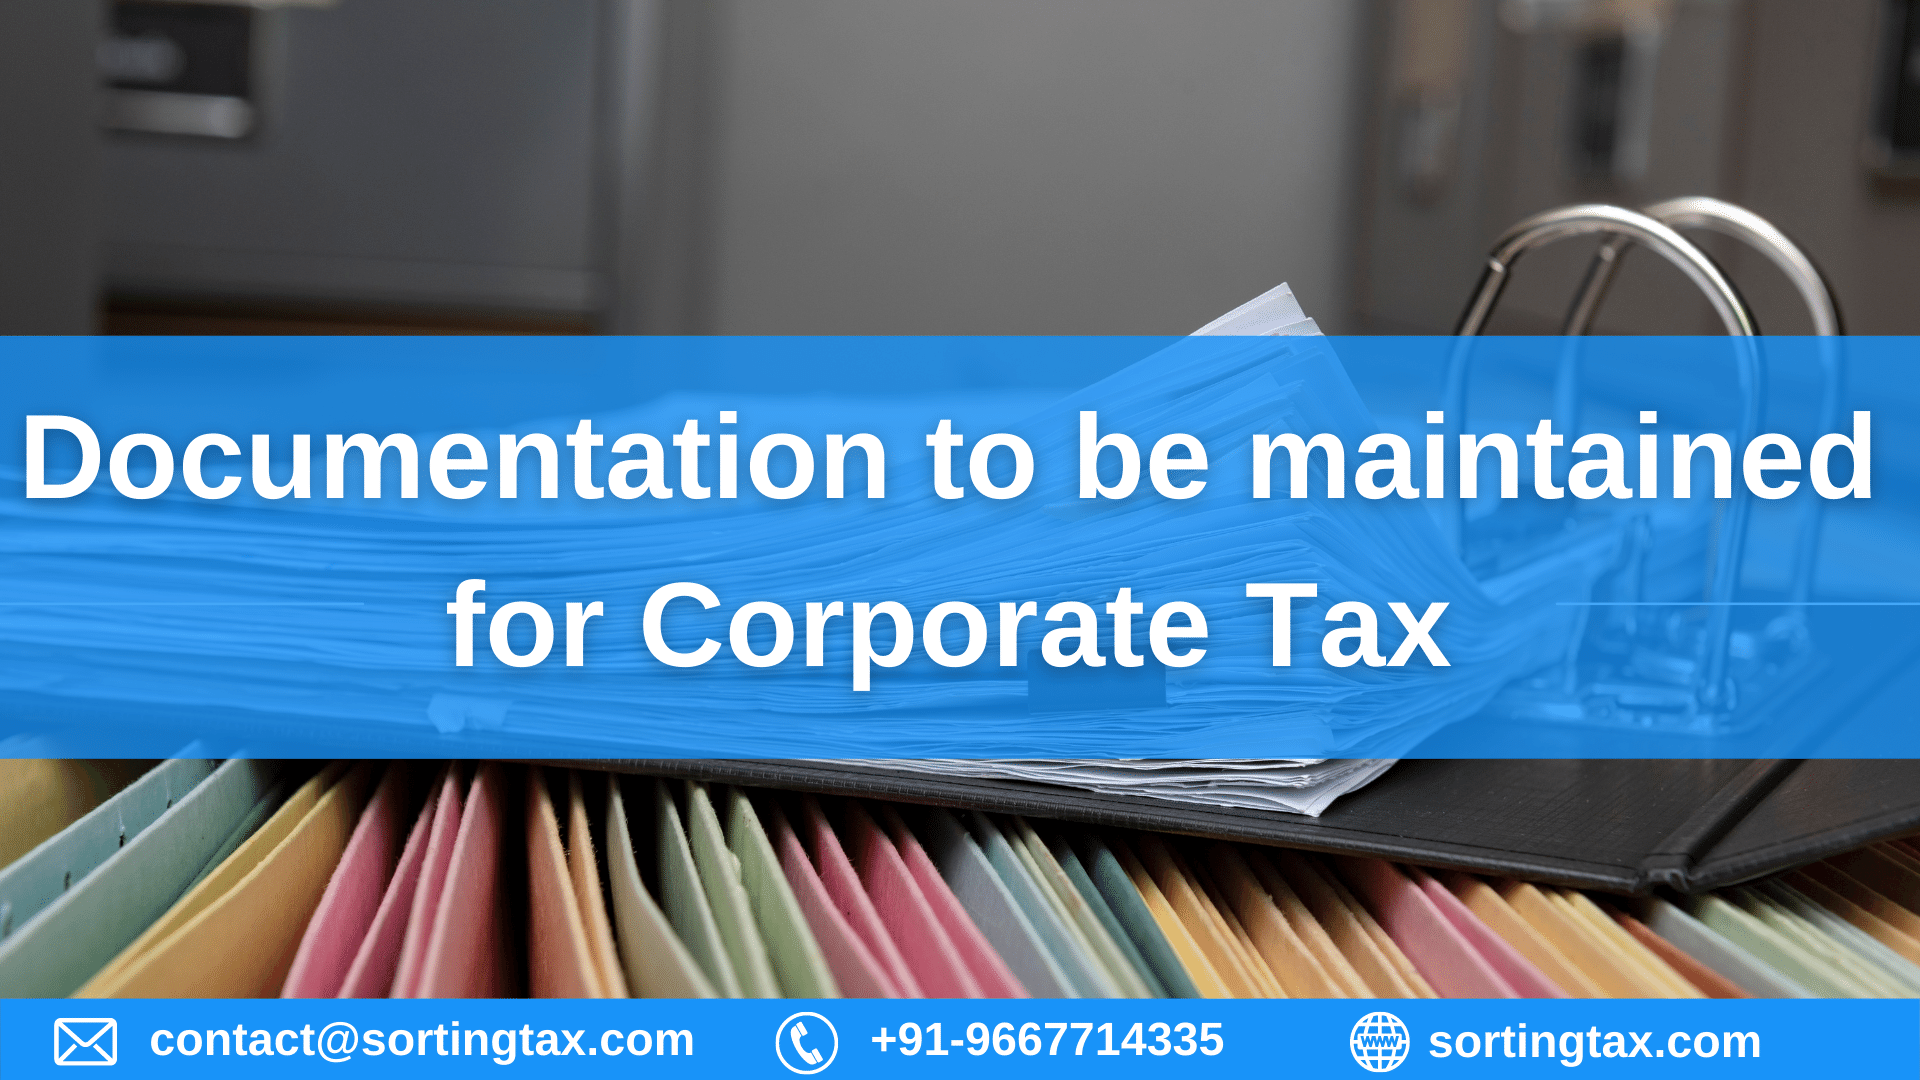 Documentation to be maintained for Corporate Tax